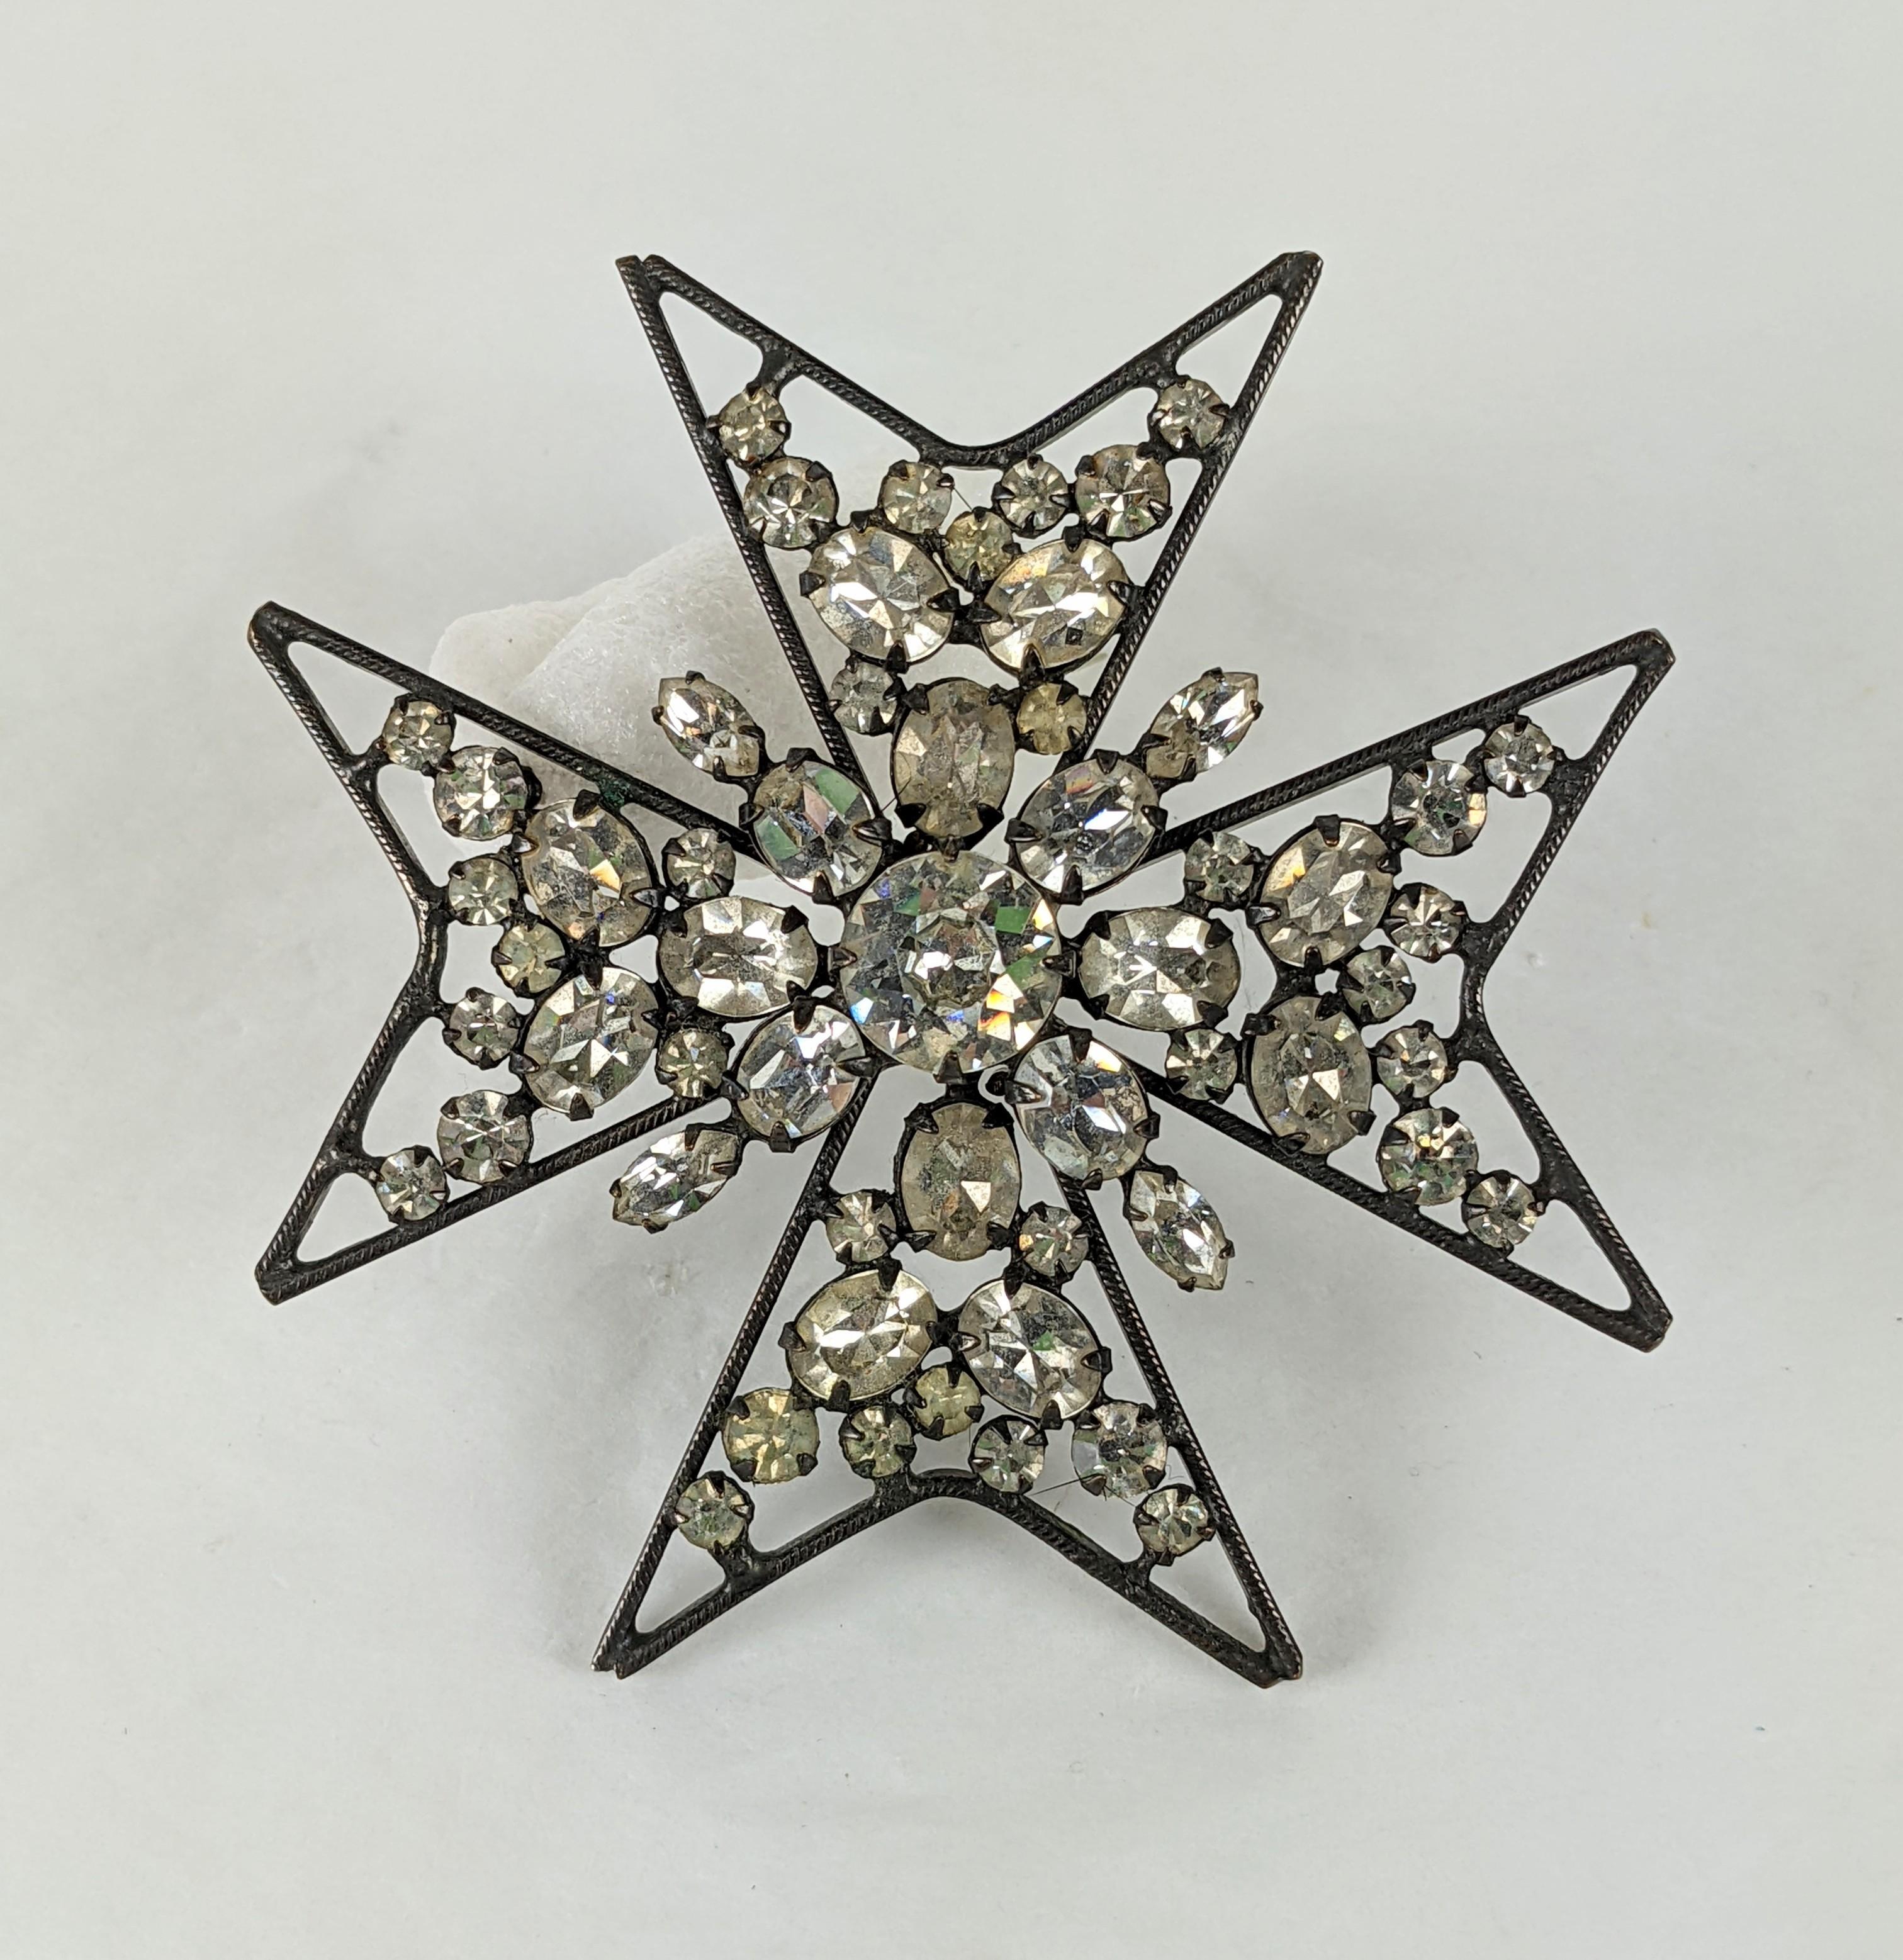 Schreiner DD Ryan owned Iron or Maltese style Cross brooch.  Featuring a raised center cluster of  varied crystal stones including marquise ovals and rounds in an openwork setting in japanned blackened metal. Former collection of DD Ryan Fashion